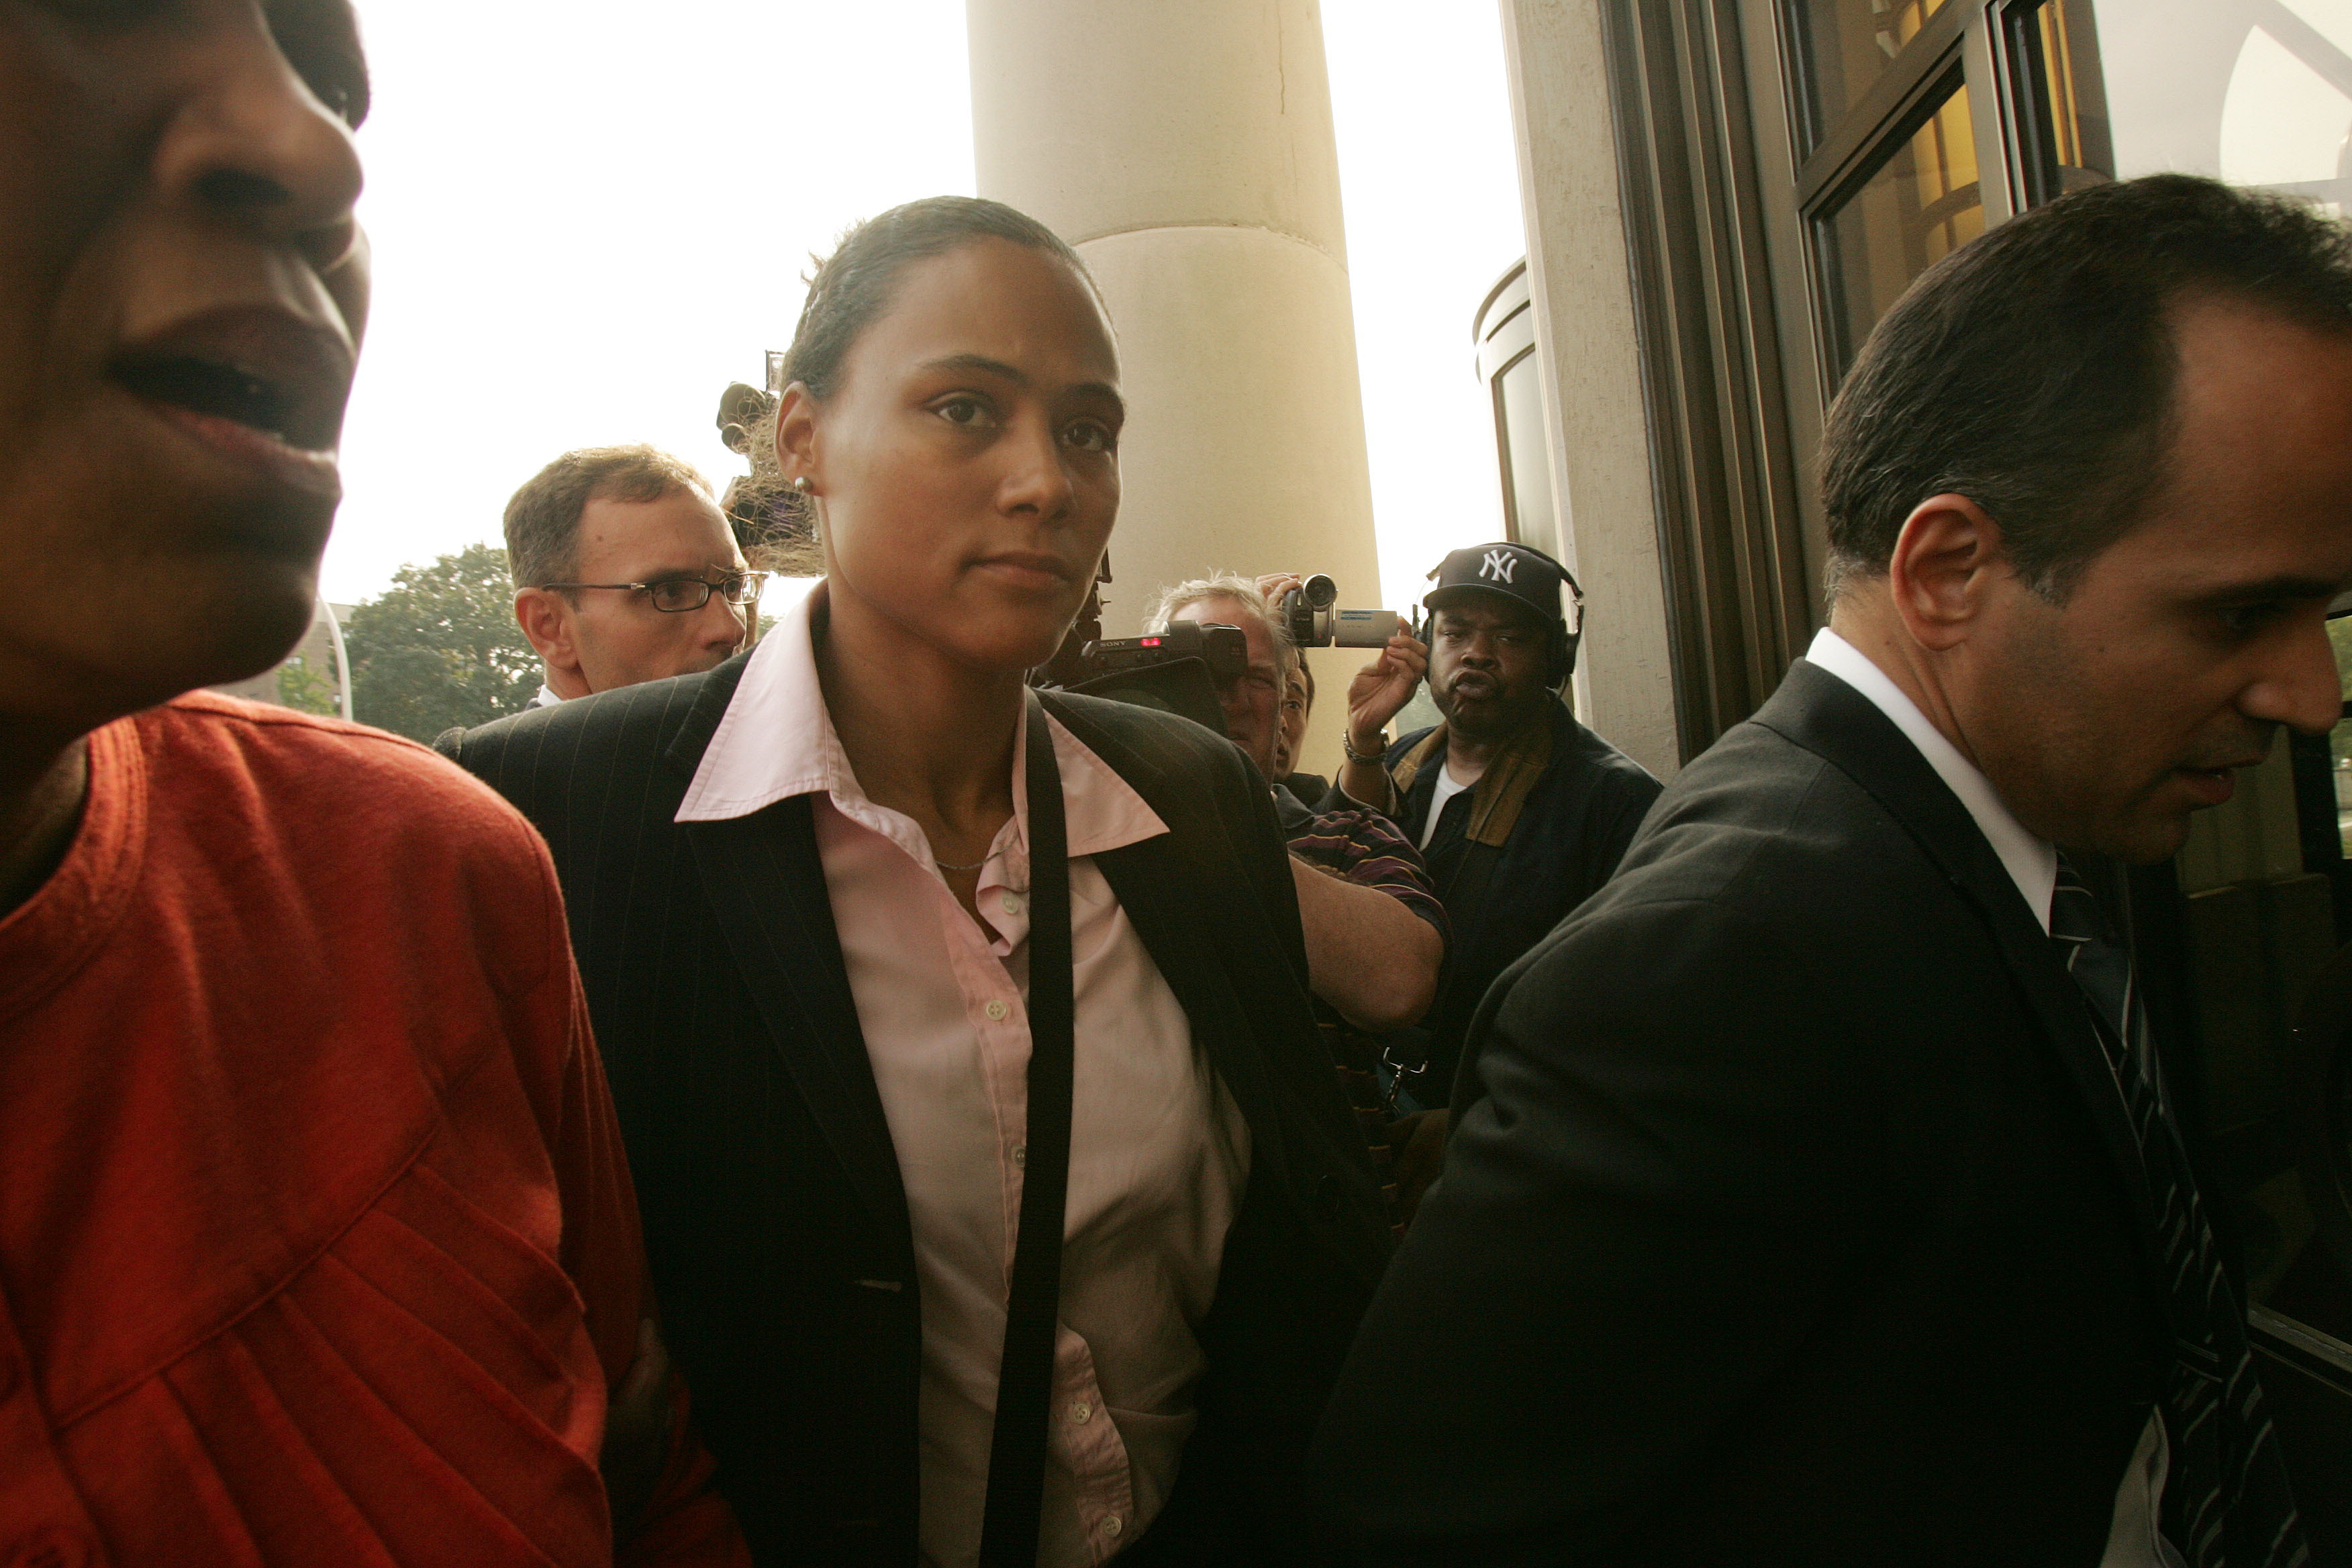 WHITE PLAINS, NY - OCTOBER 5:  Three-time Olympic gold medalist Marion Jones (C) enters a United States federal courthouse October 5, 2007 in White Plains, New York. Jones is expected to plead guilty to charges in connection with steroid use.  (Photo by H